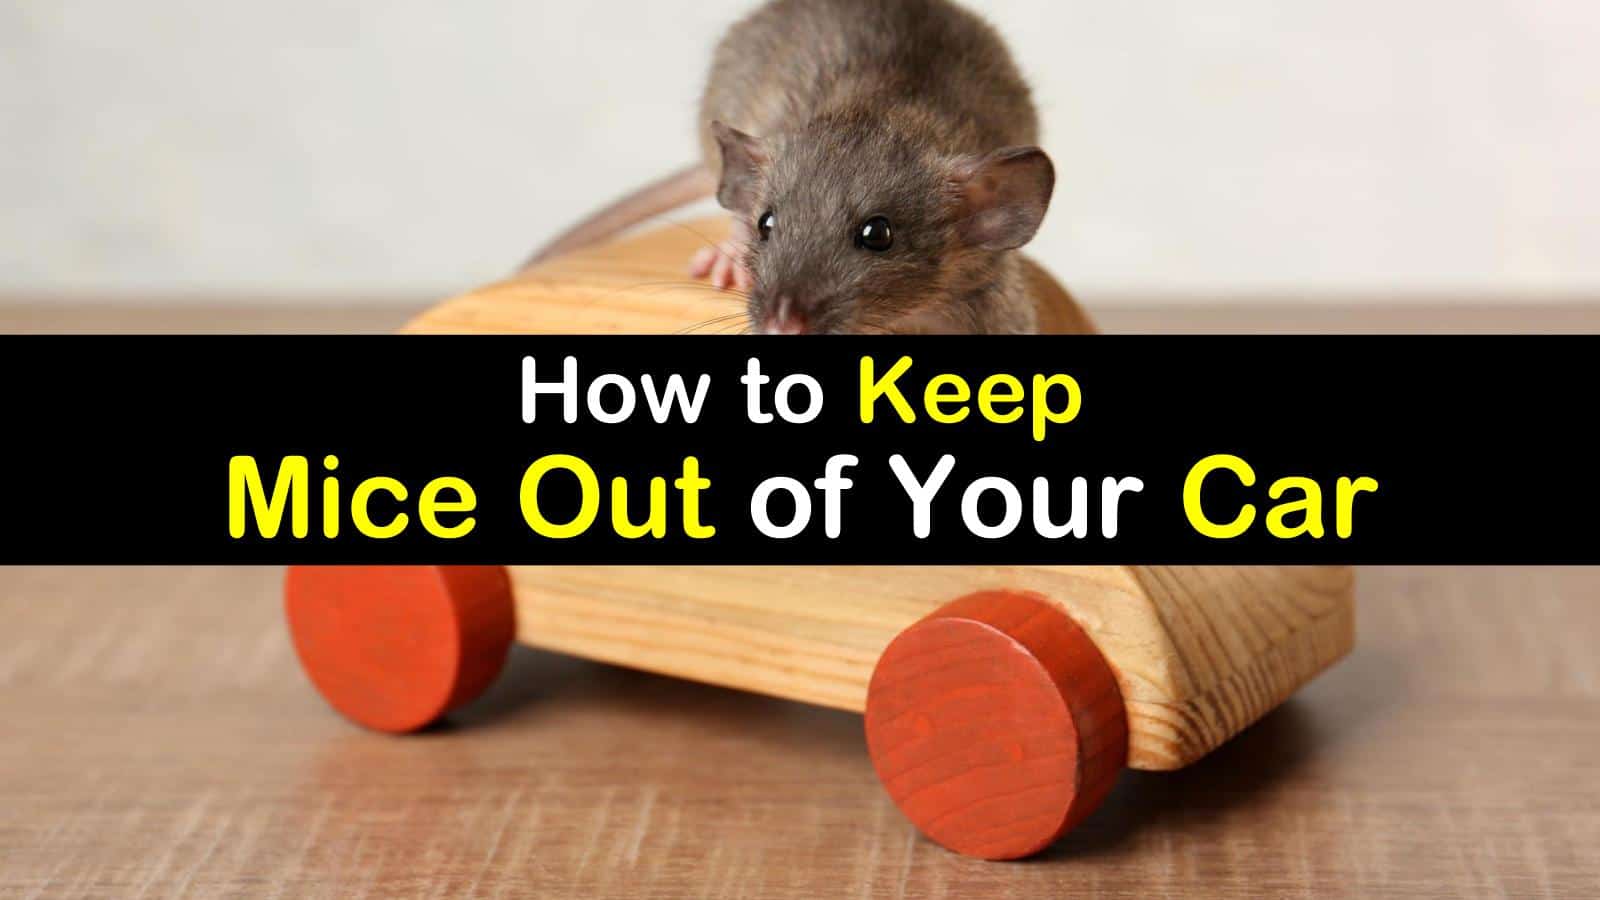 How To Keep Mice Out Of Your Car titleimg1